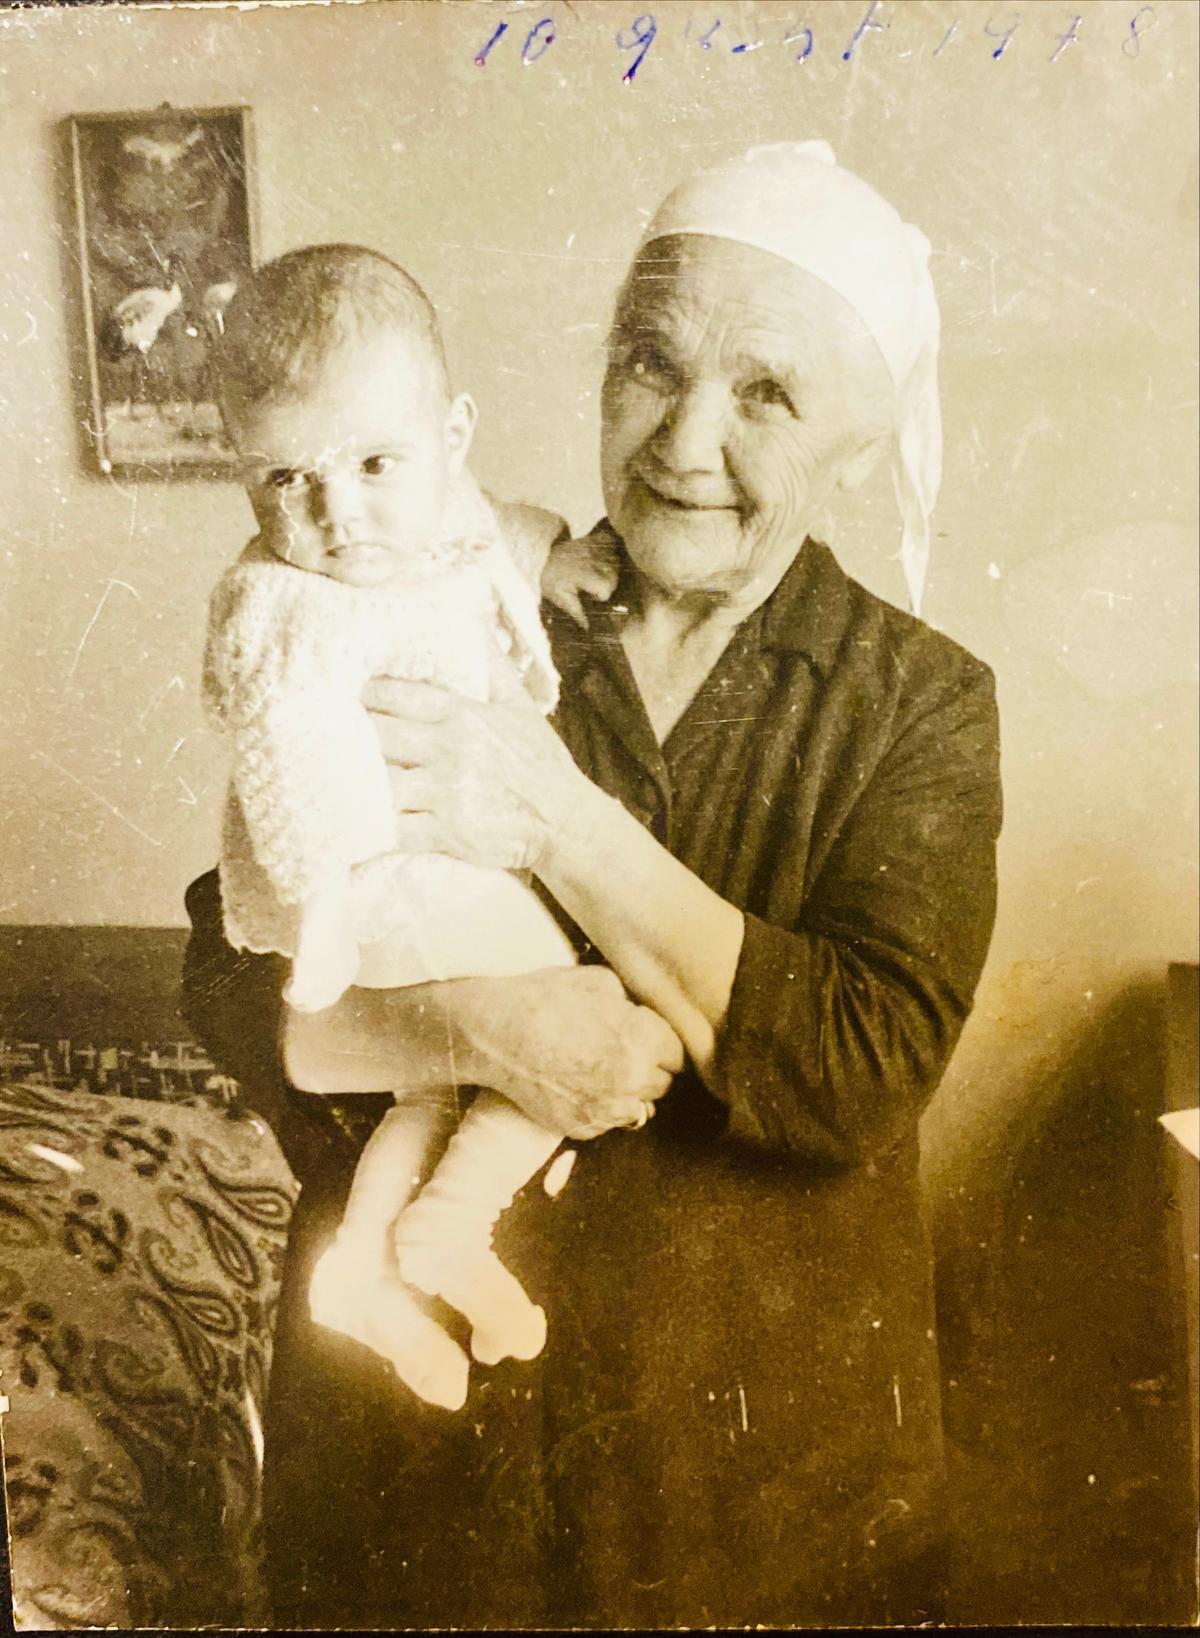 Elida Dakoli as a baby being held by her paternal grandmother, Jaja Dakoli, who was "thrown into the street in the middle of the night" with her children in 1946 after her family home and belongings were sequestered by the Albanian communist regime. (Courtesy of <a href="http://www.elidadakoli.com/">Elida Dakoli</a>)